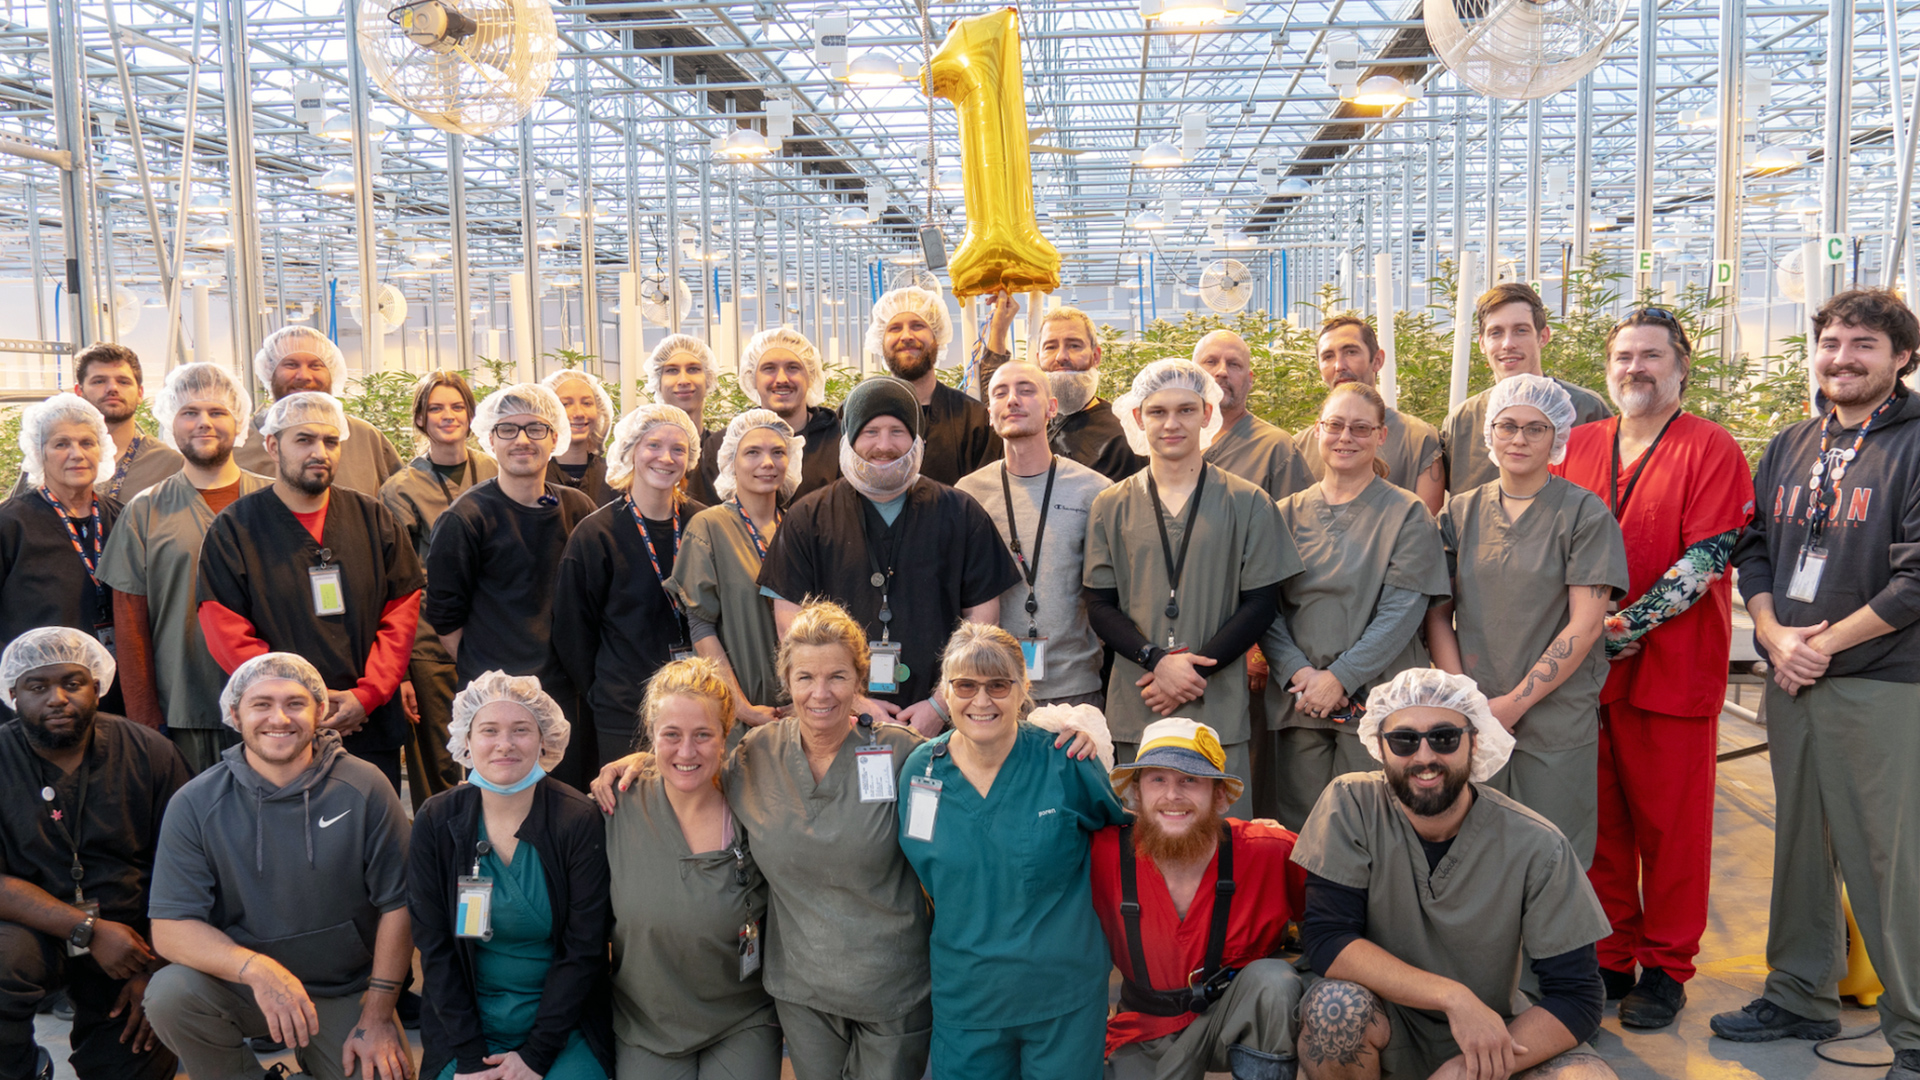 IESO team photo at the grow facility